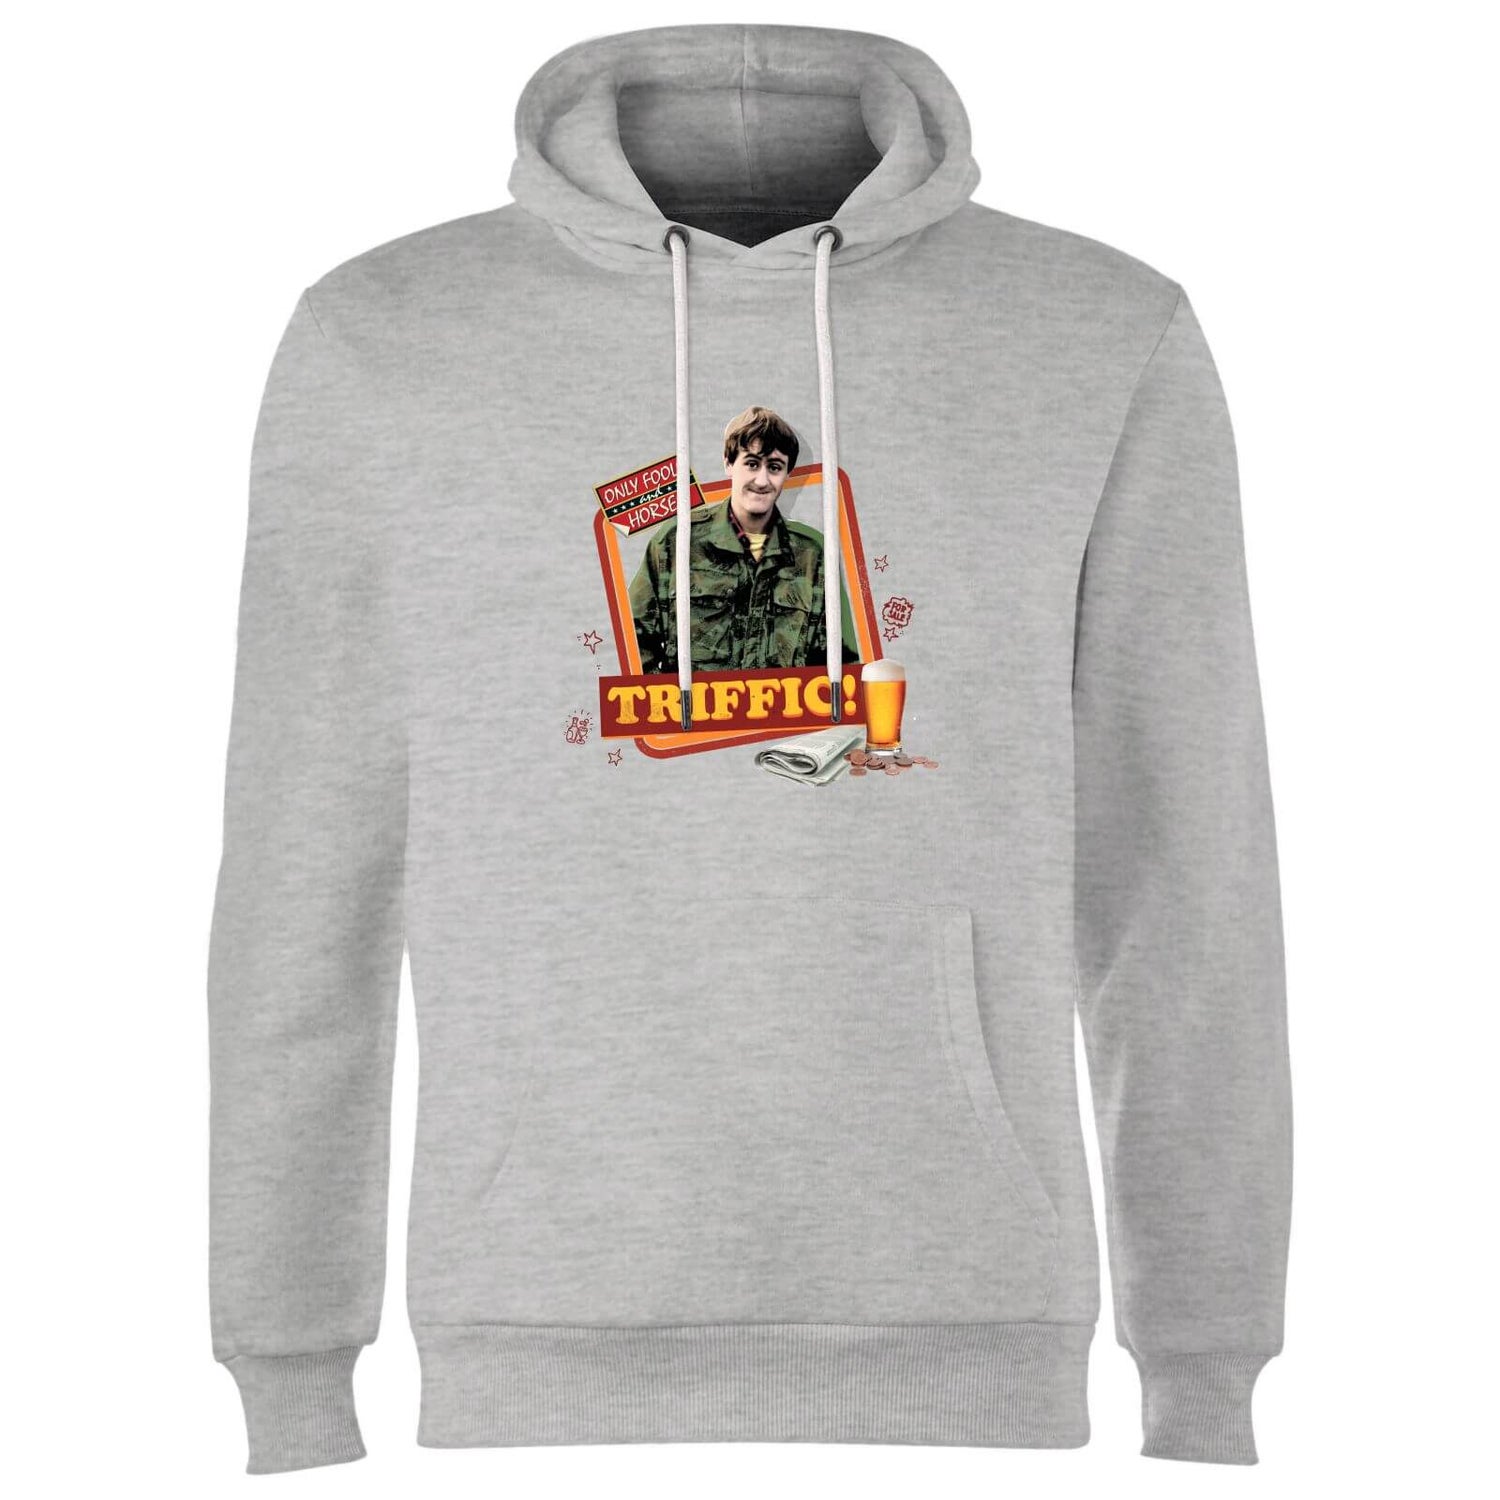 Only Fools And Horses Triffic Hoodie - Grey